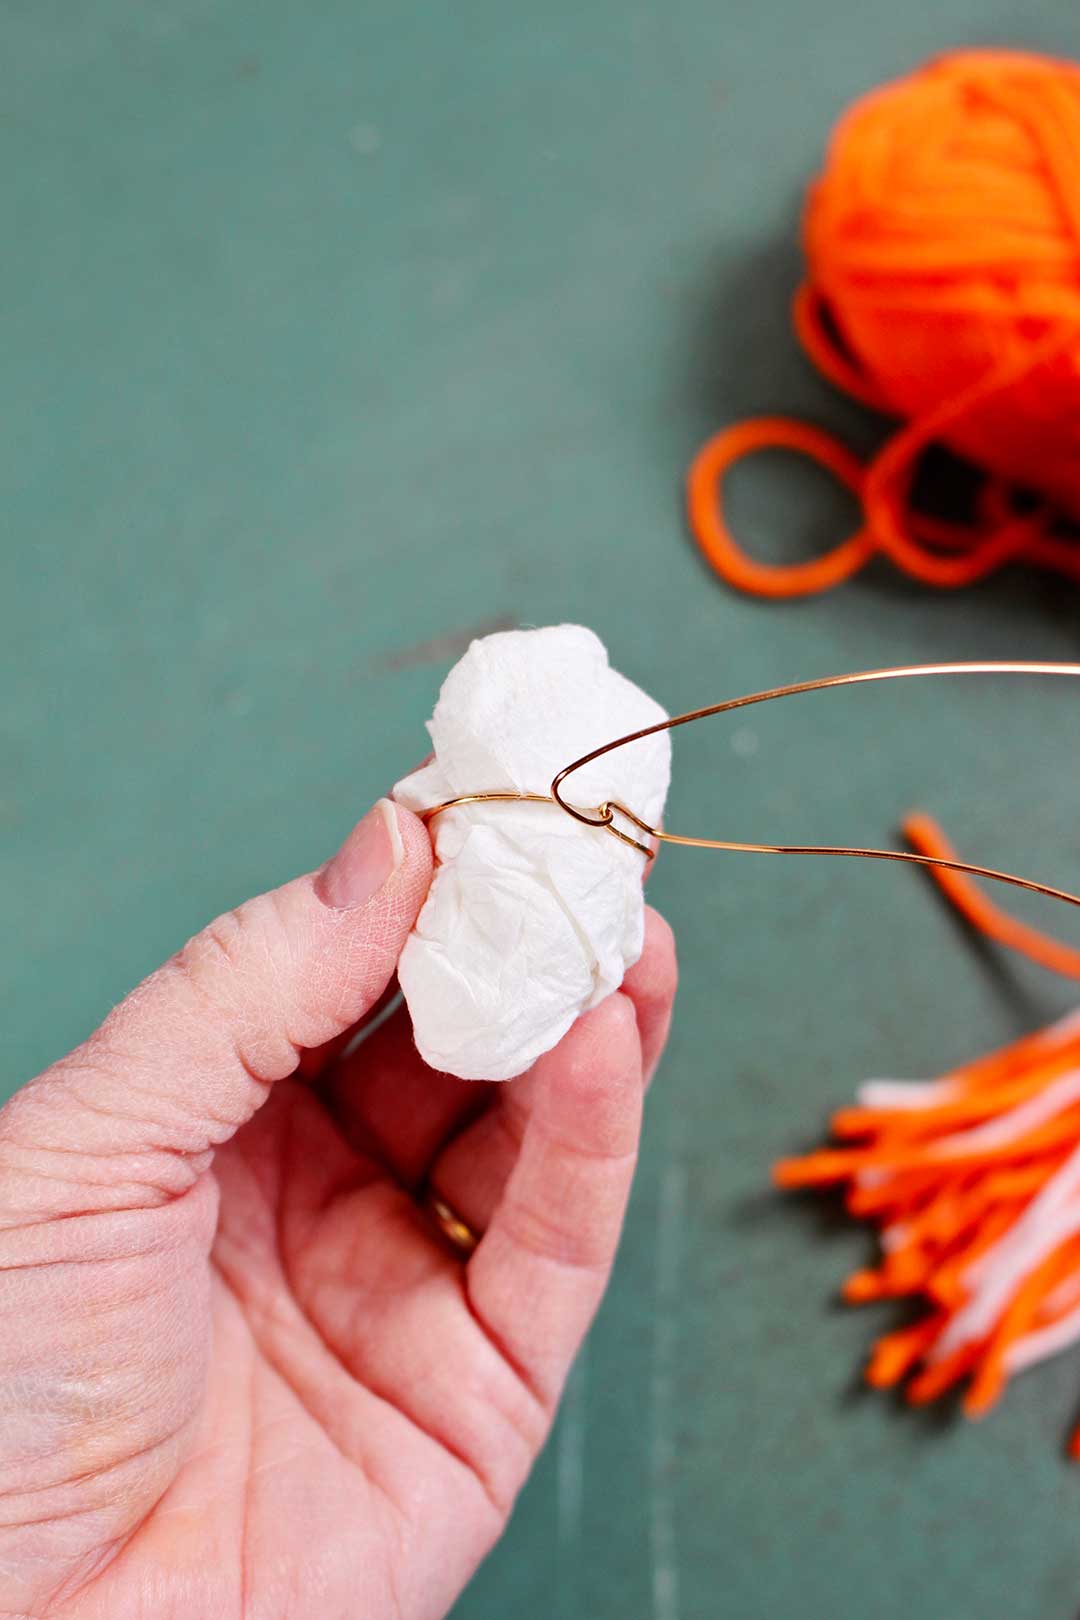 Copper wire wrapped around a ball of paper towels